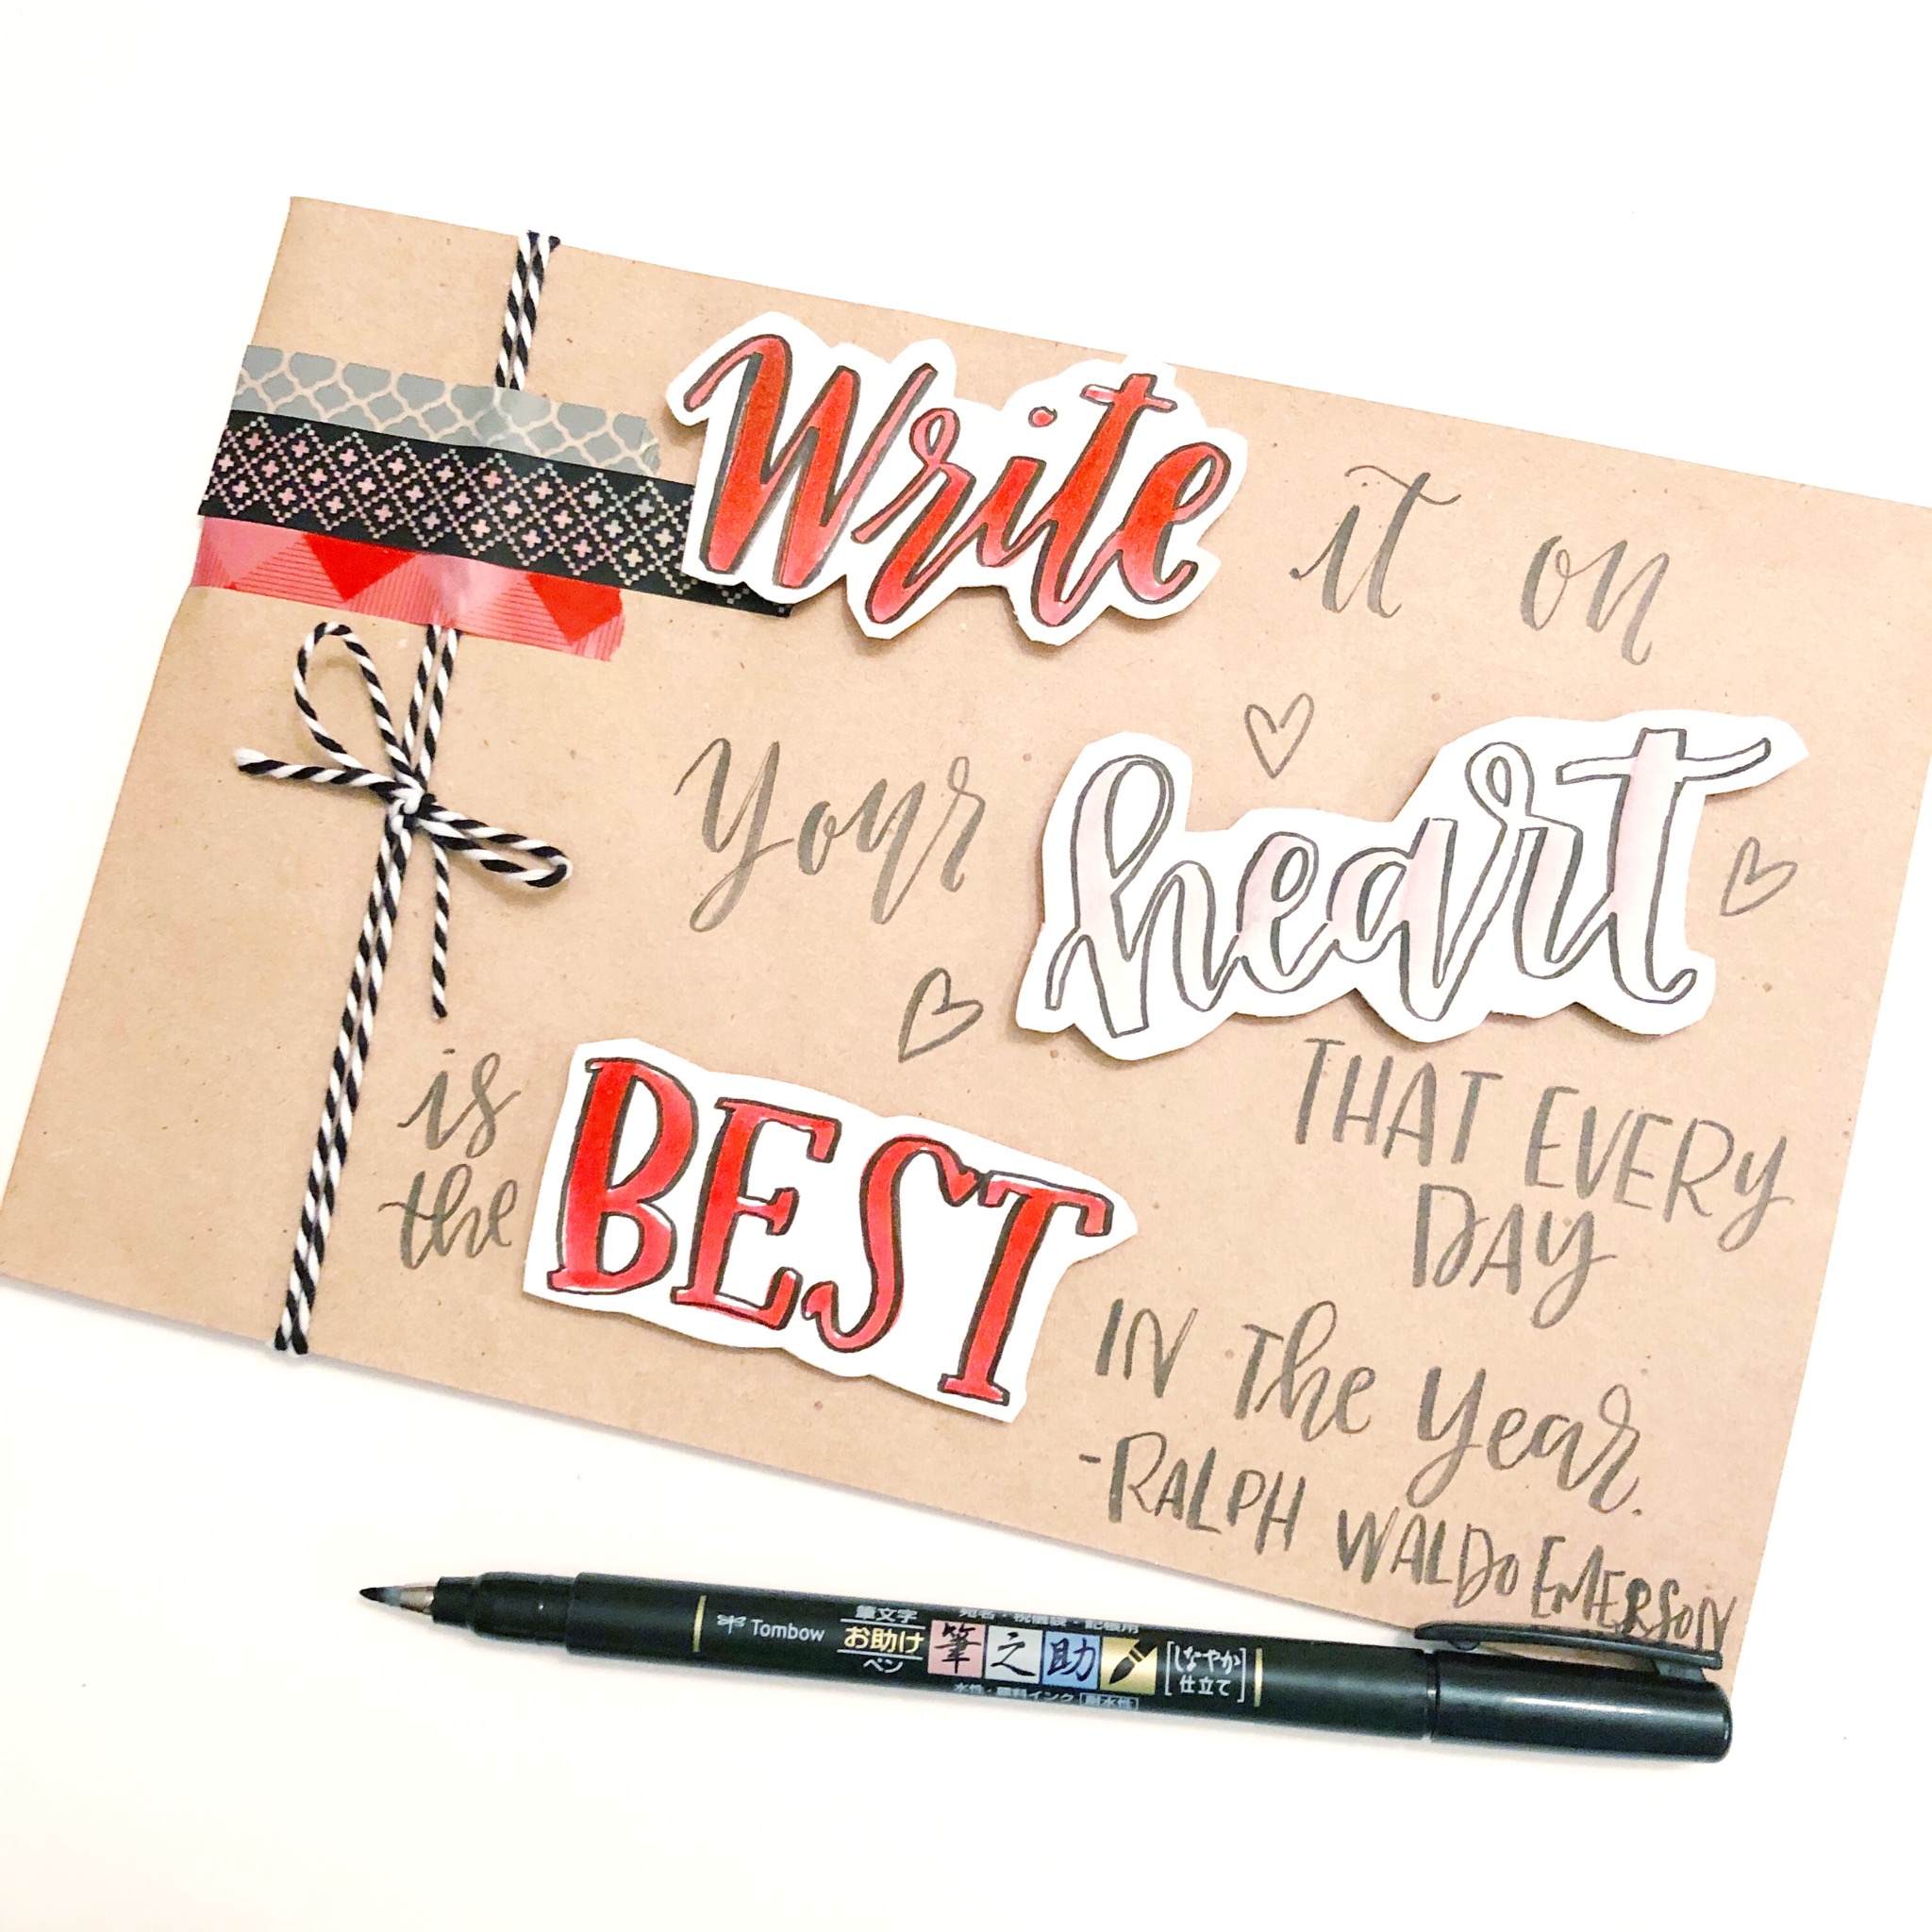 Lauren Fitzmaurice kicks off 2018 helping you set goals with a creative step by step project. Using the best lettering tools and adhesives from Tombow USA, write down your goals and inspire yourself to take action toward your dreams. For more lettering goodness, tips and tricks, check out renmadecalligraphy.com or @renmadecalligraphy on instagram.